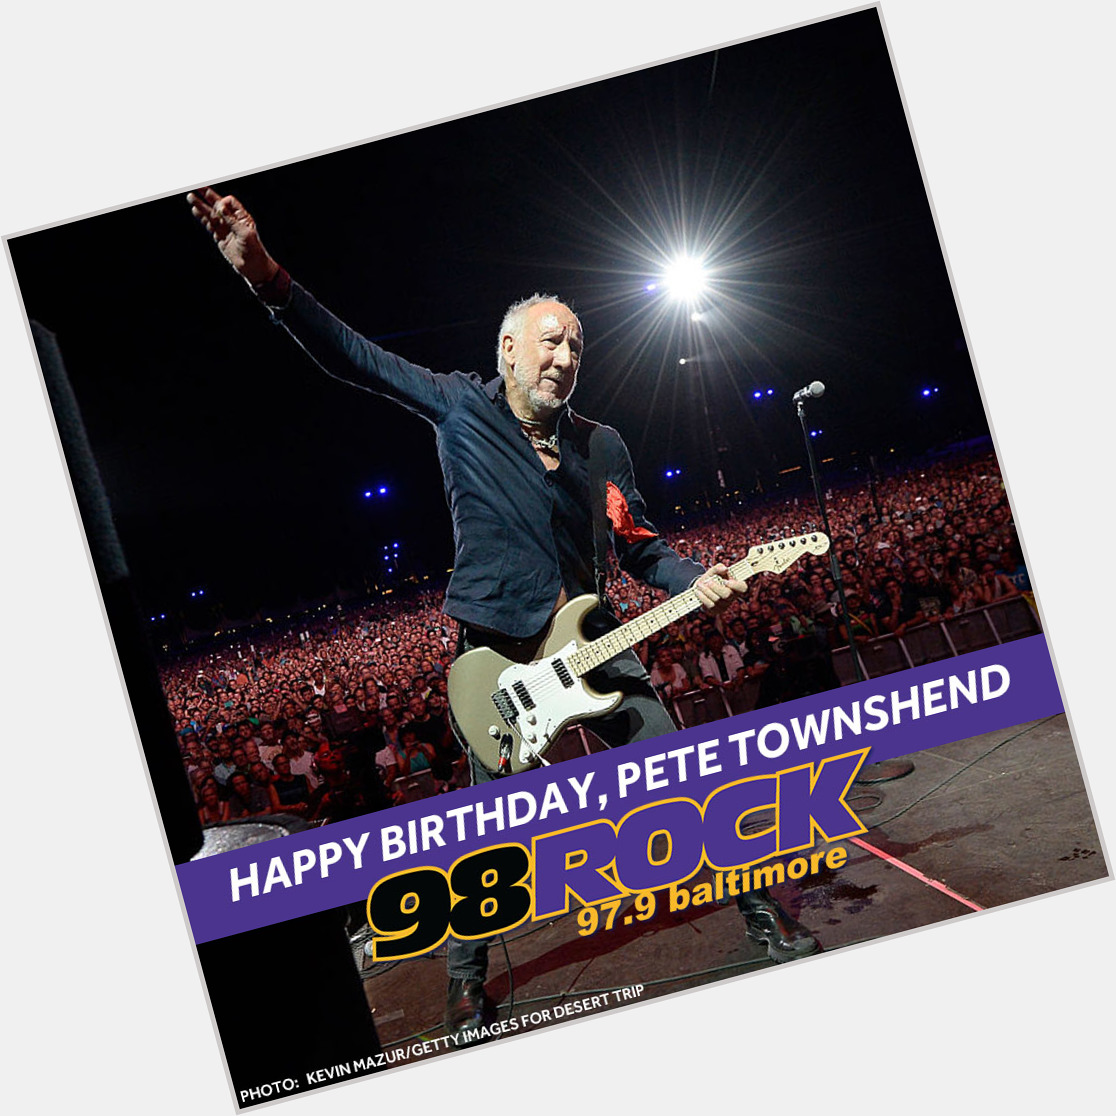 Happy 76th birthday to the iconic guitar god Pete Townshend of The Who!  